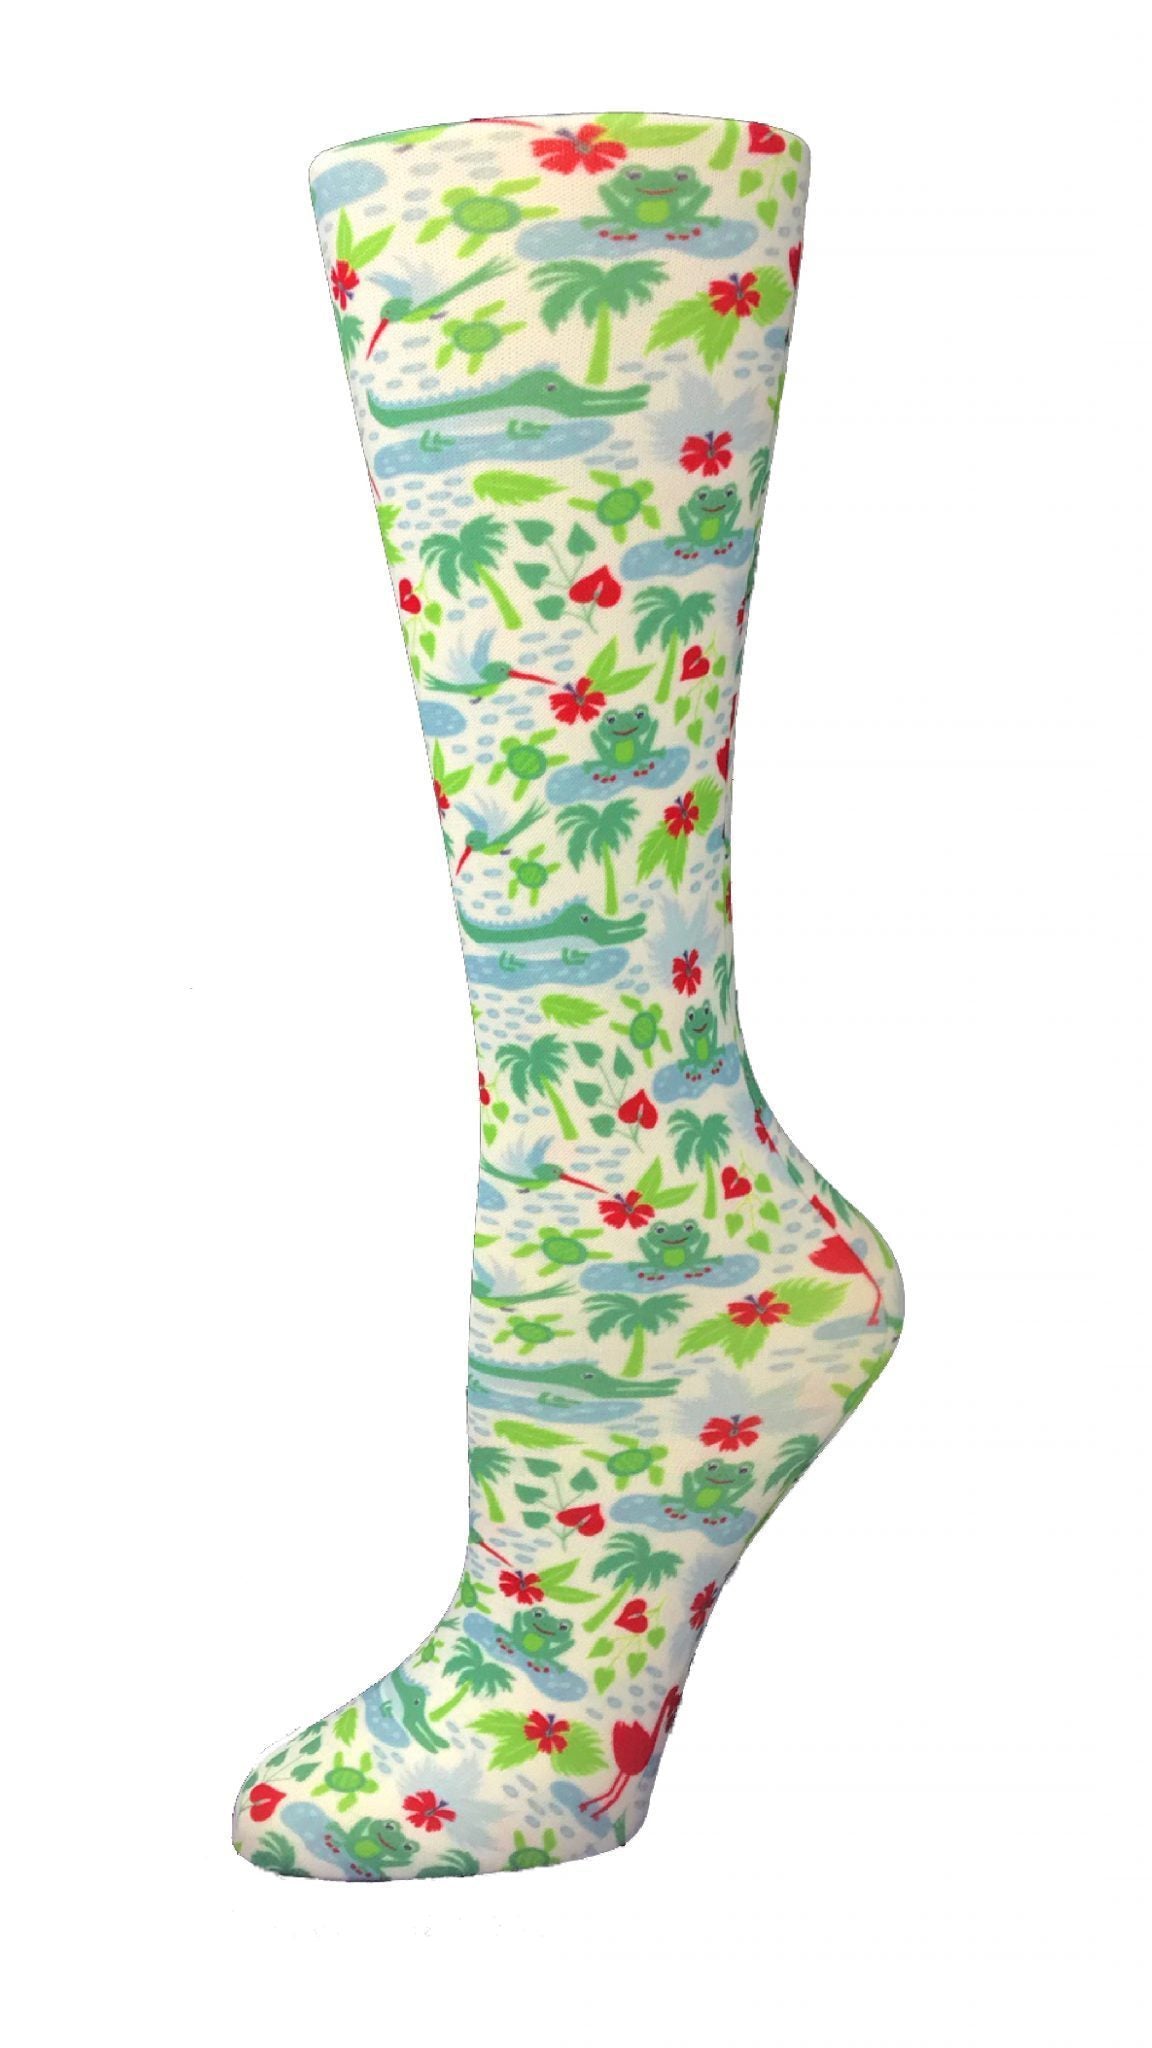 Cutieful Moderate Compression Socks 10-18 MMhg Wide Calf Knit Print Pattern Oasis at Parker's Clothing and Shoes.